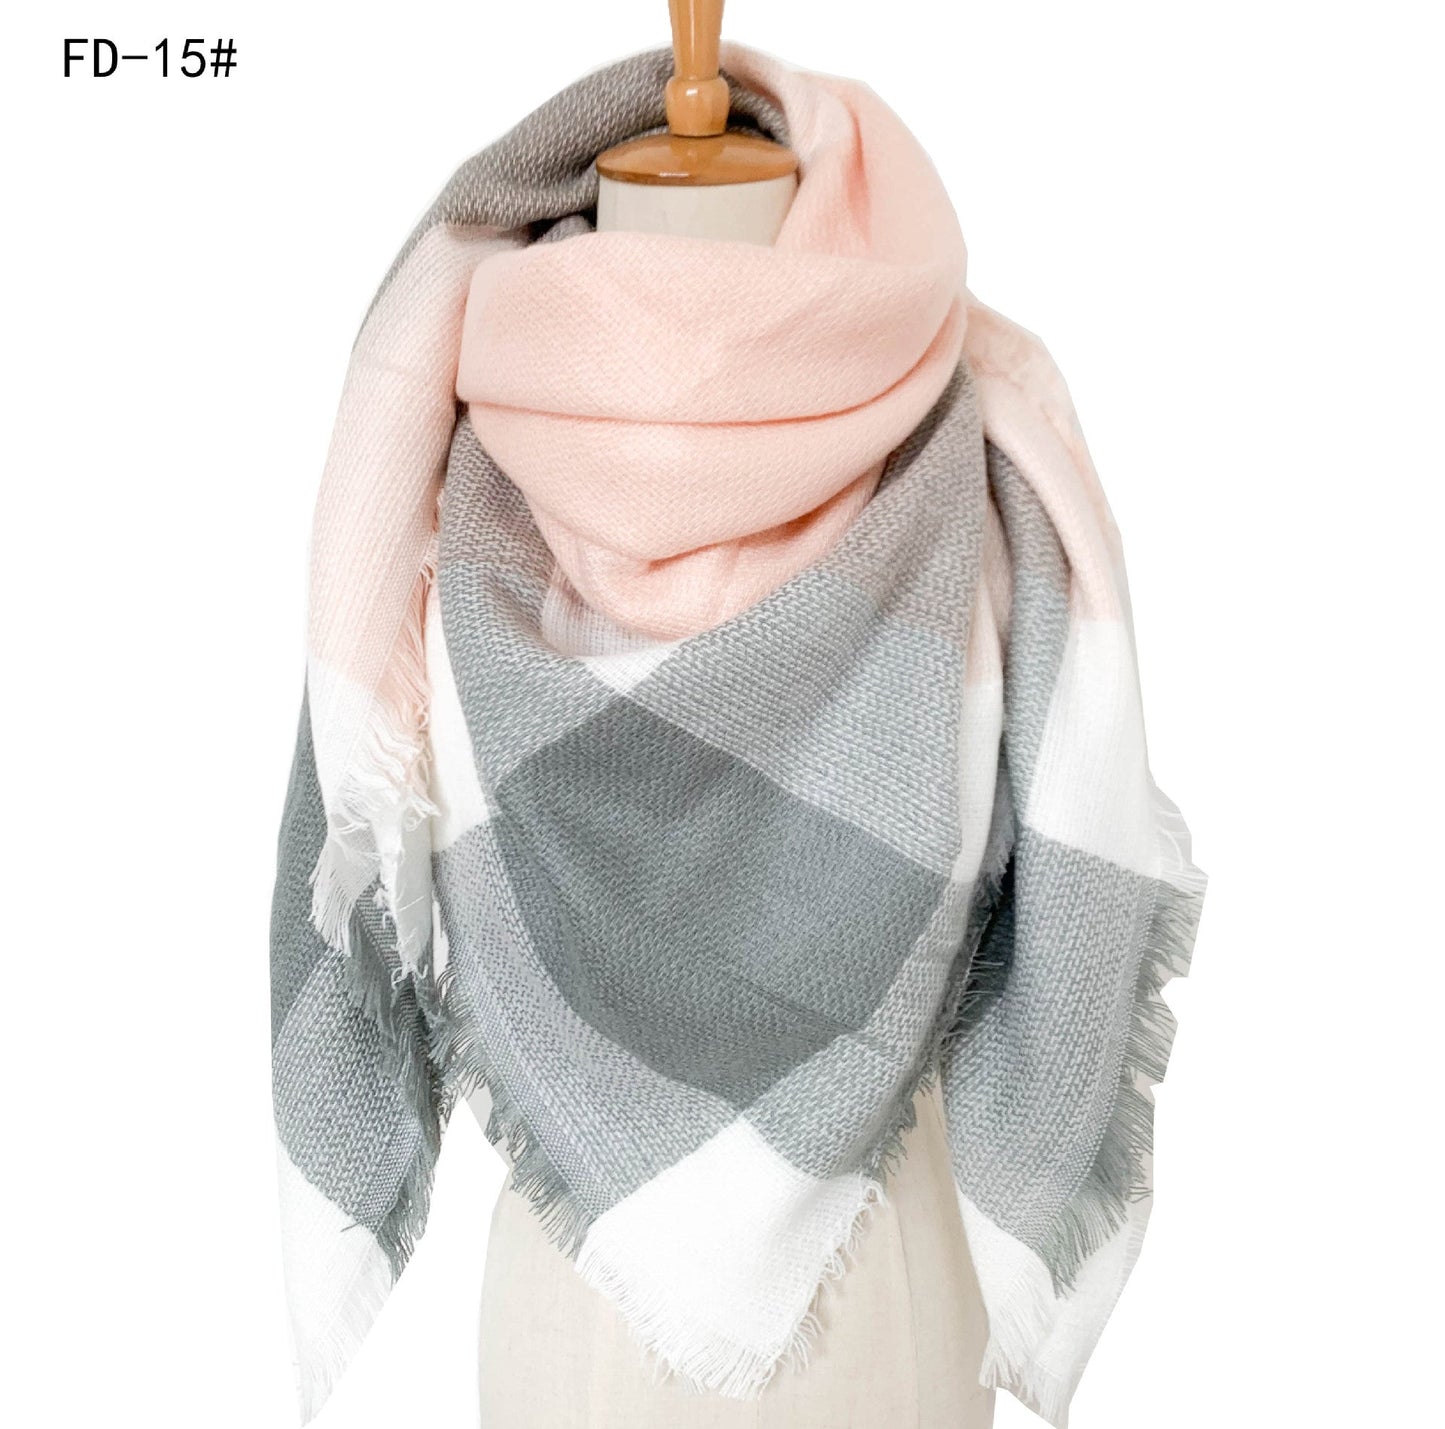 Winter Warm Plaid Scarves for Women-Scarves & Shawls-Light Pink-140cm-Free Shipping Leatheretro